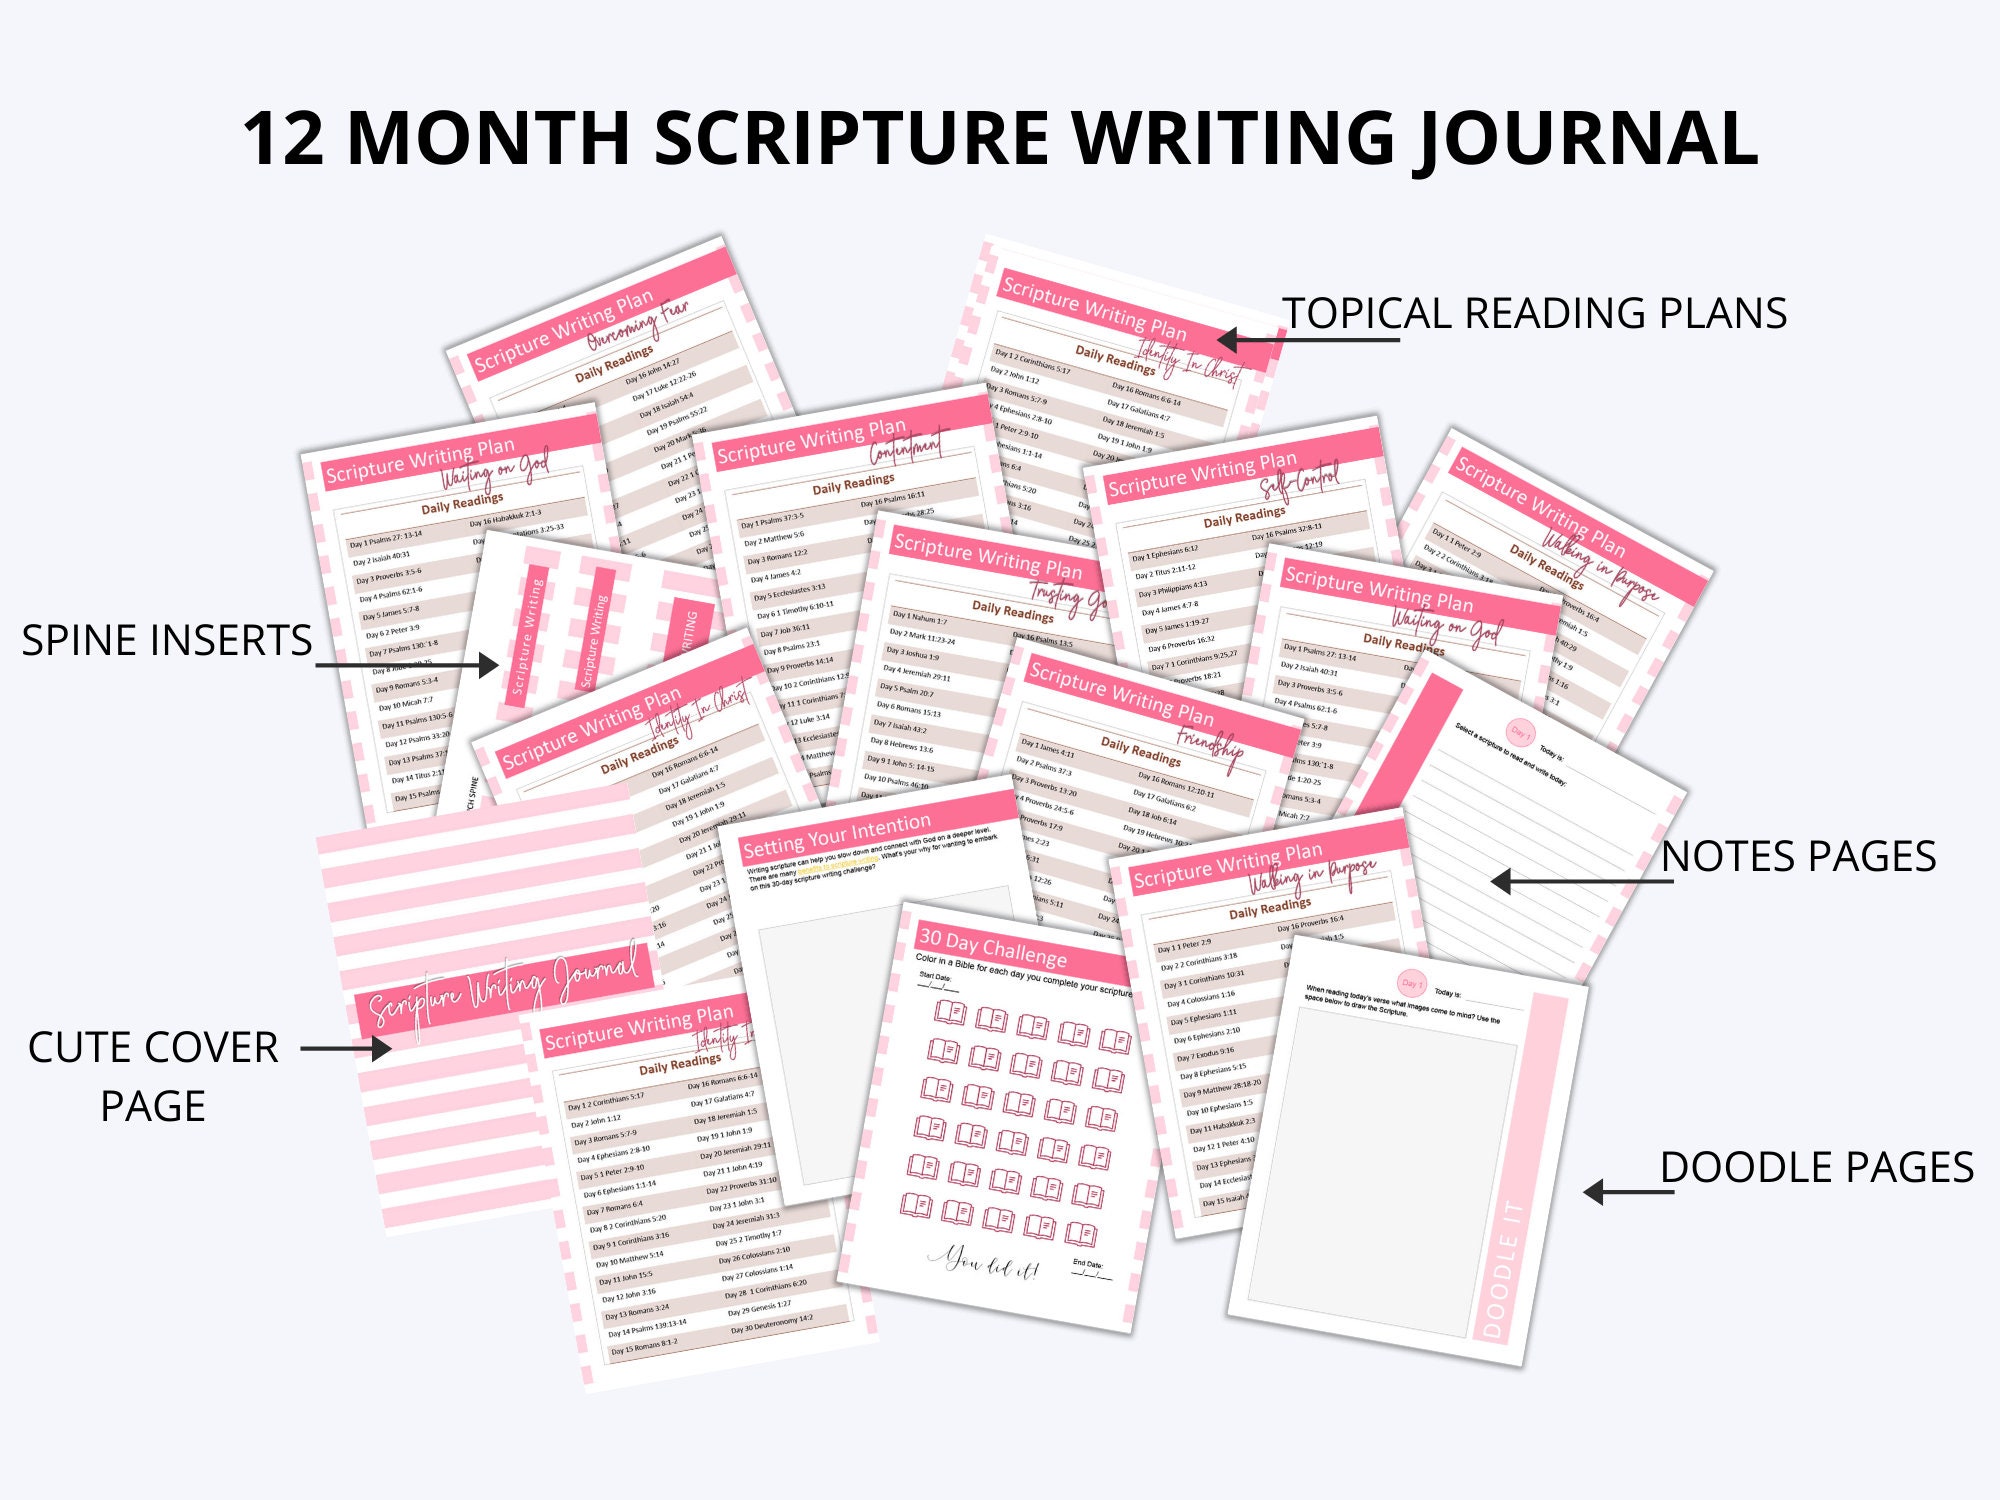 12-month-scripture-writing-plan-30-day-scripture-writing-journal-pages-printable-bible-study